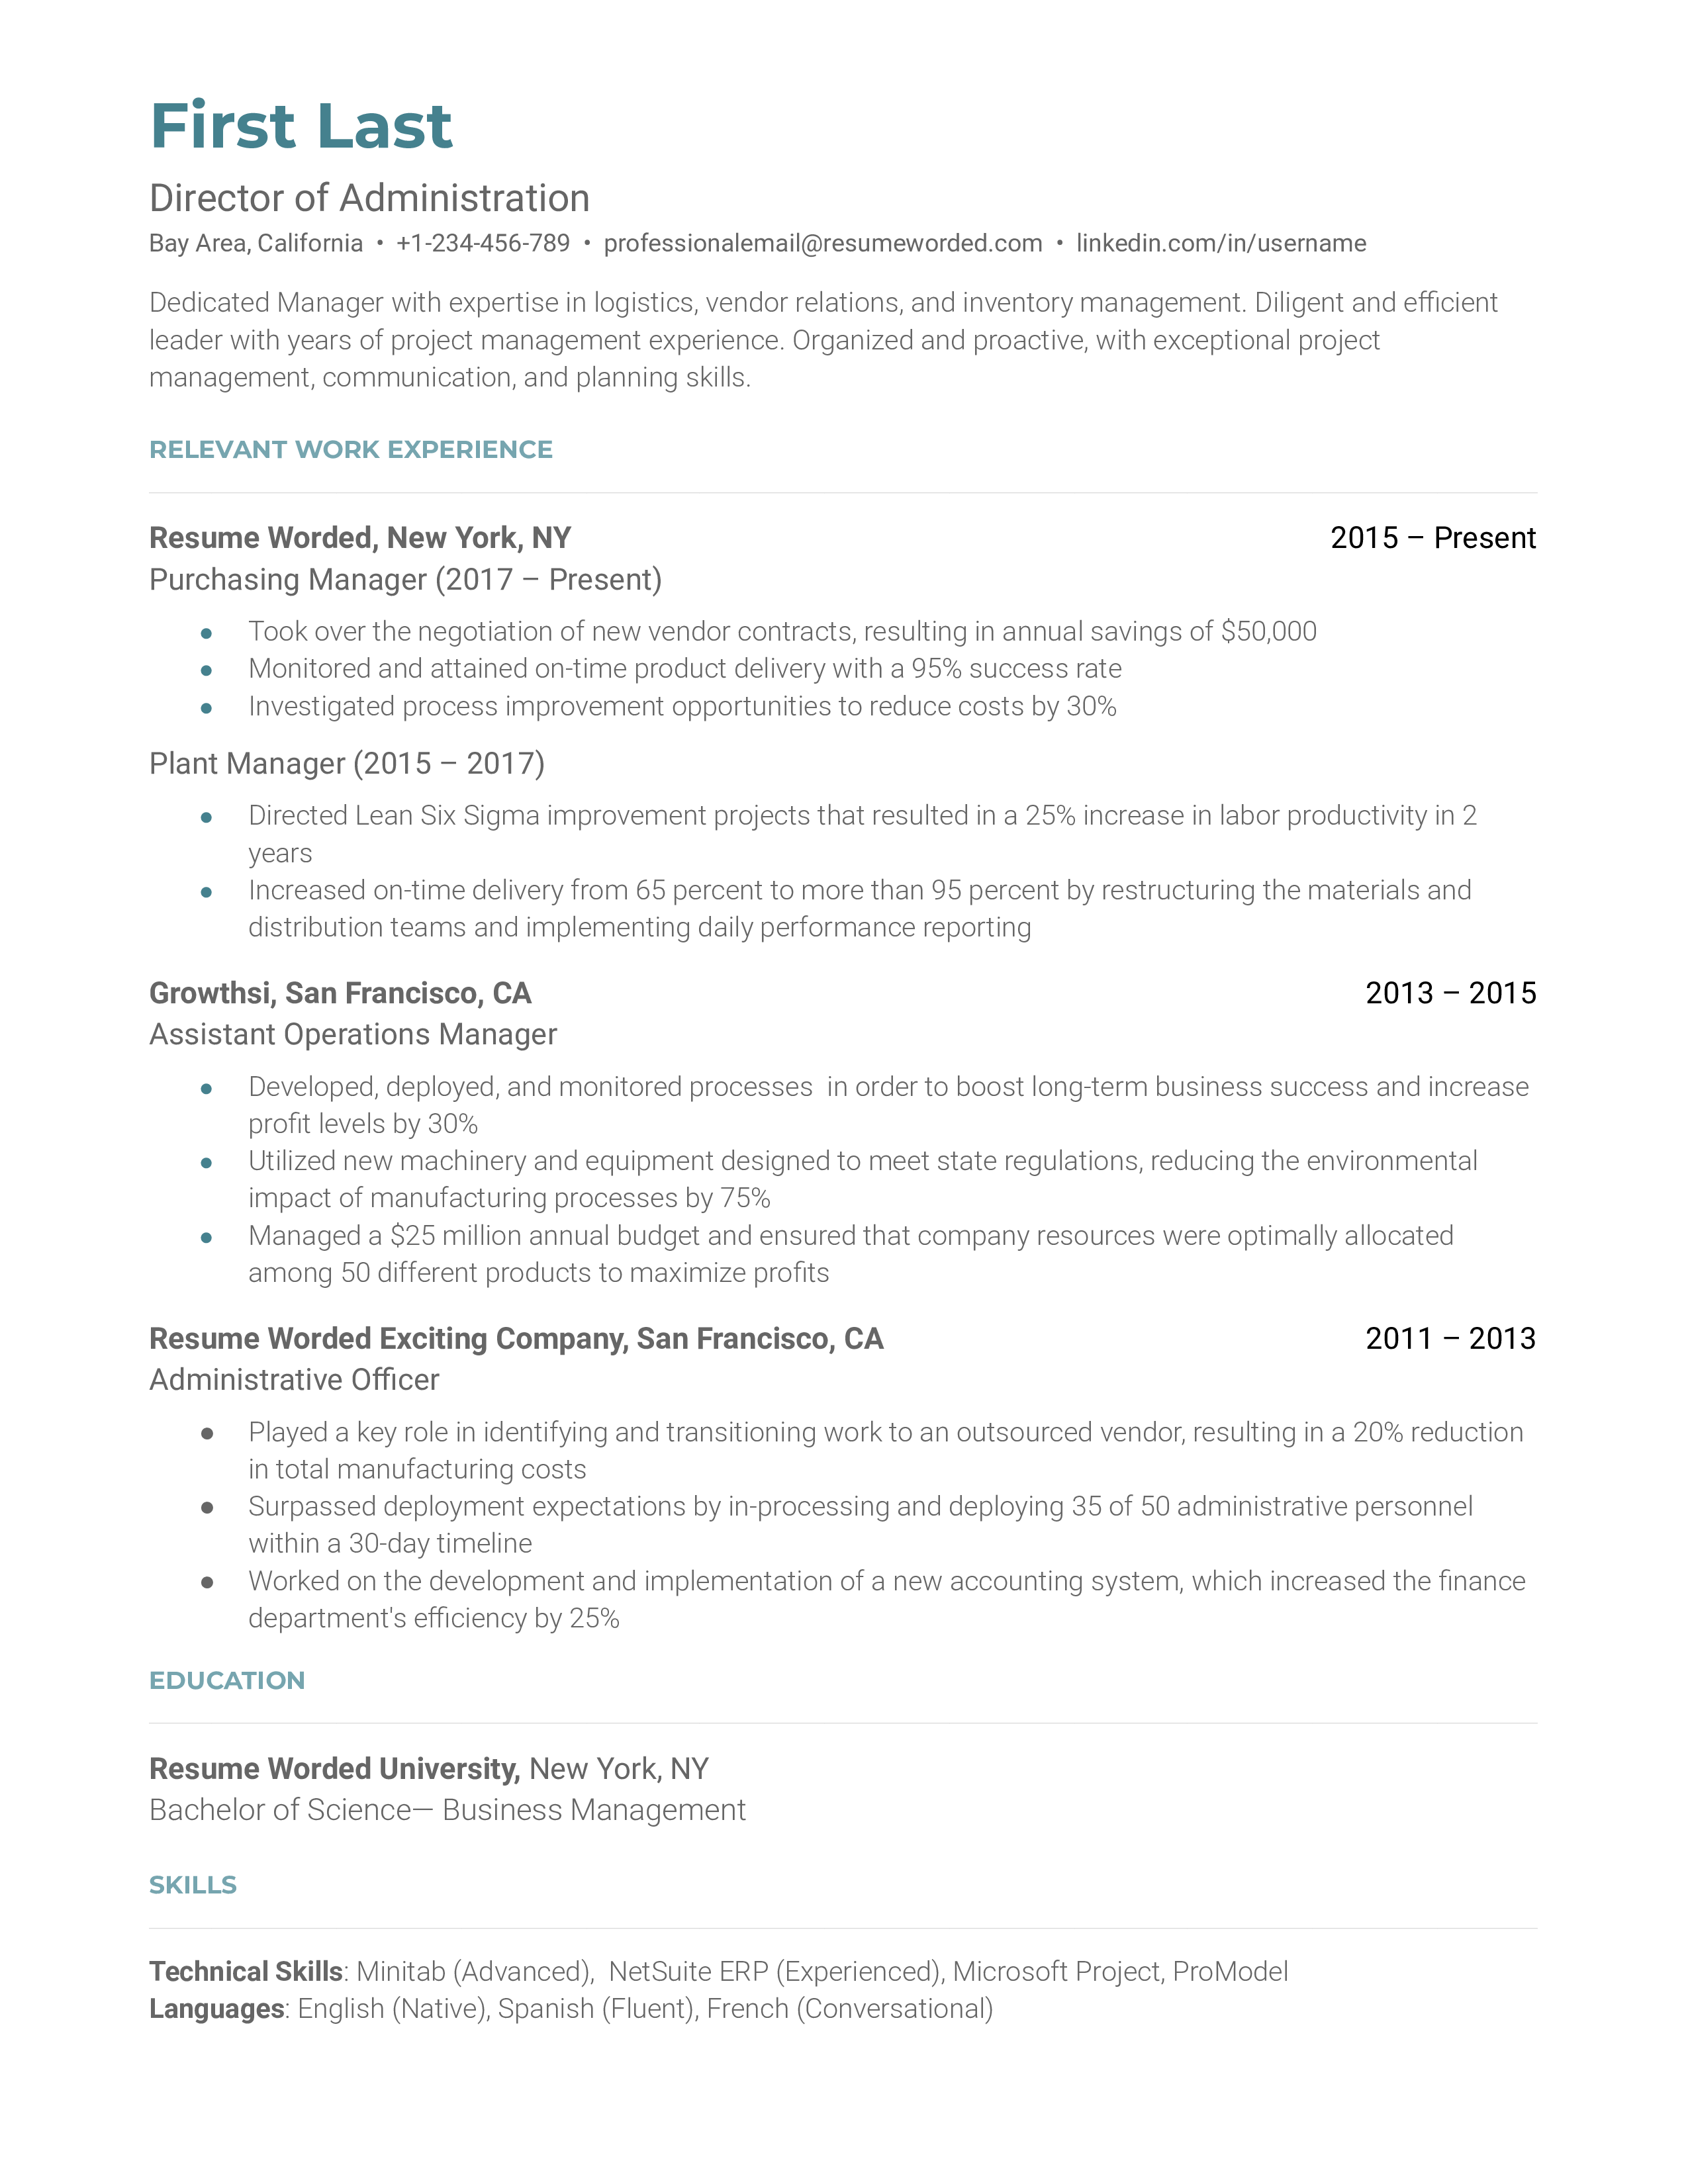 A CV screenshot for a Director of Administration role.